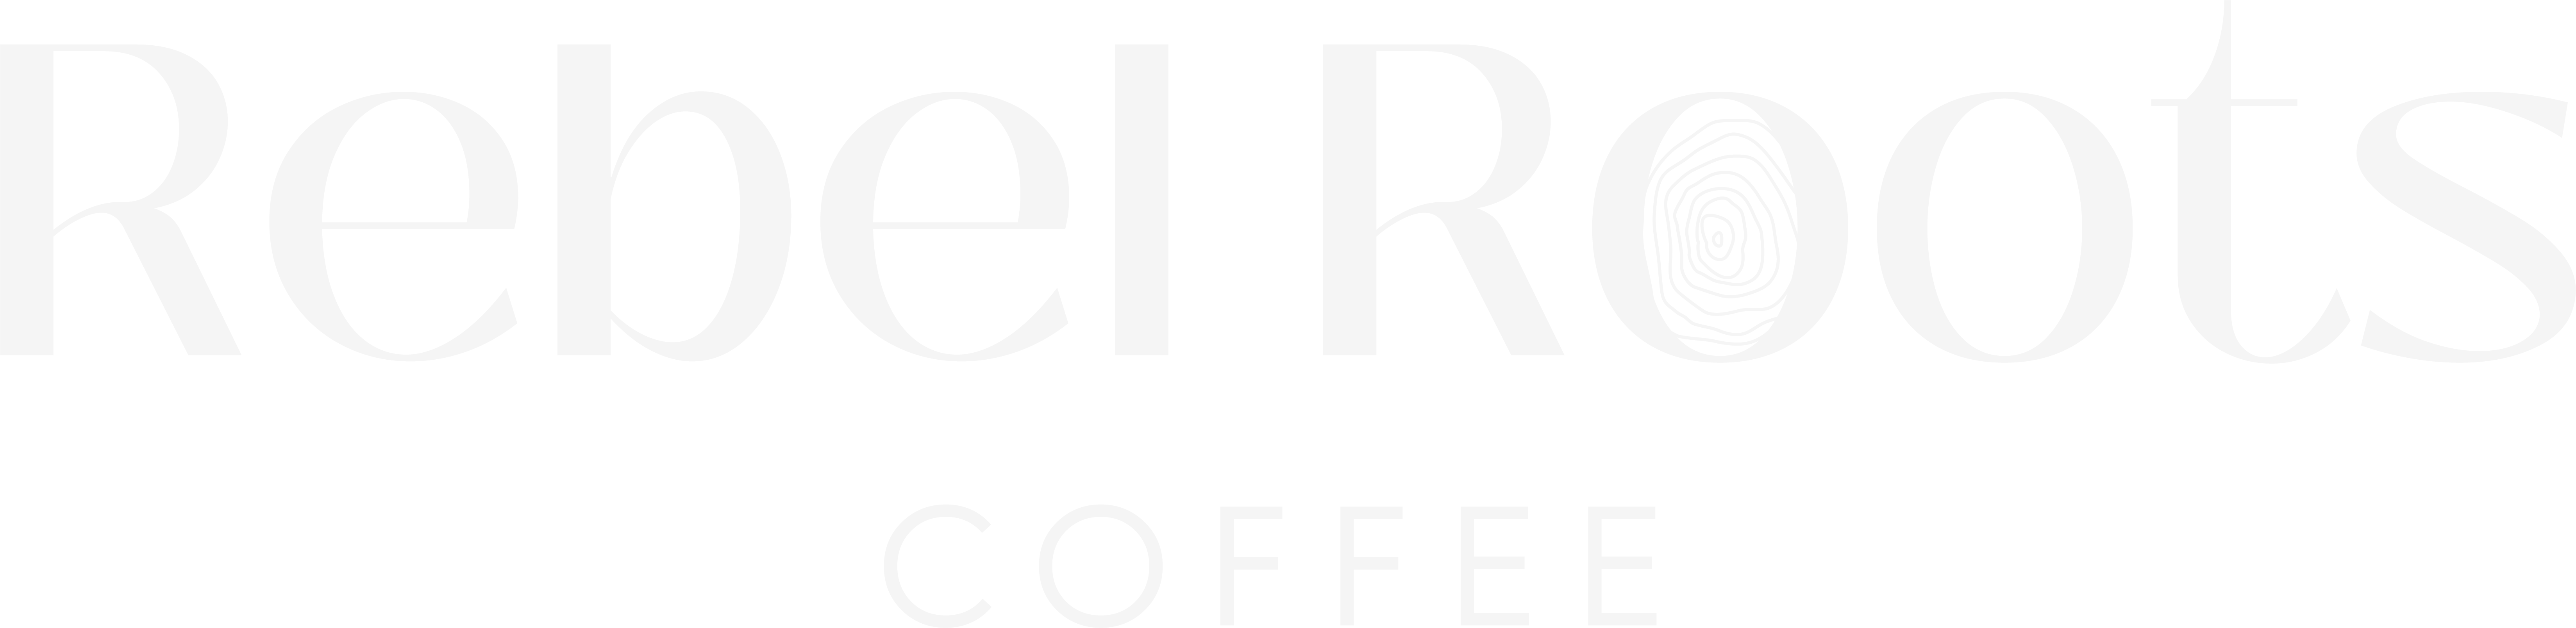 Rebel Roots Coffee